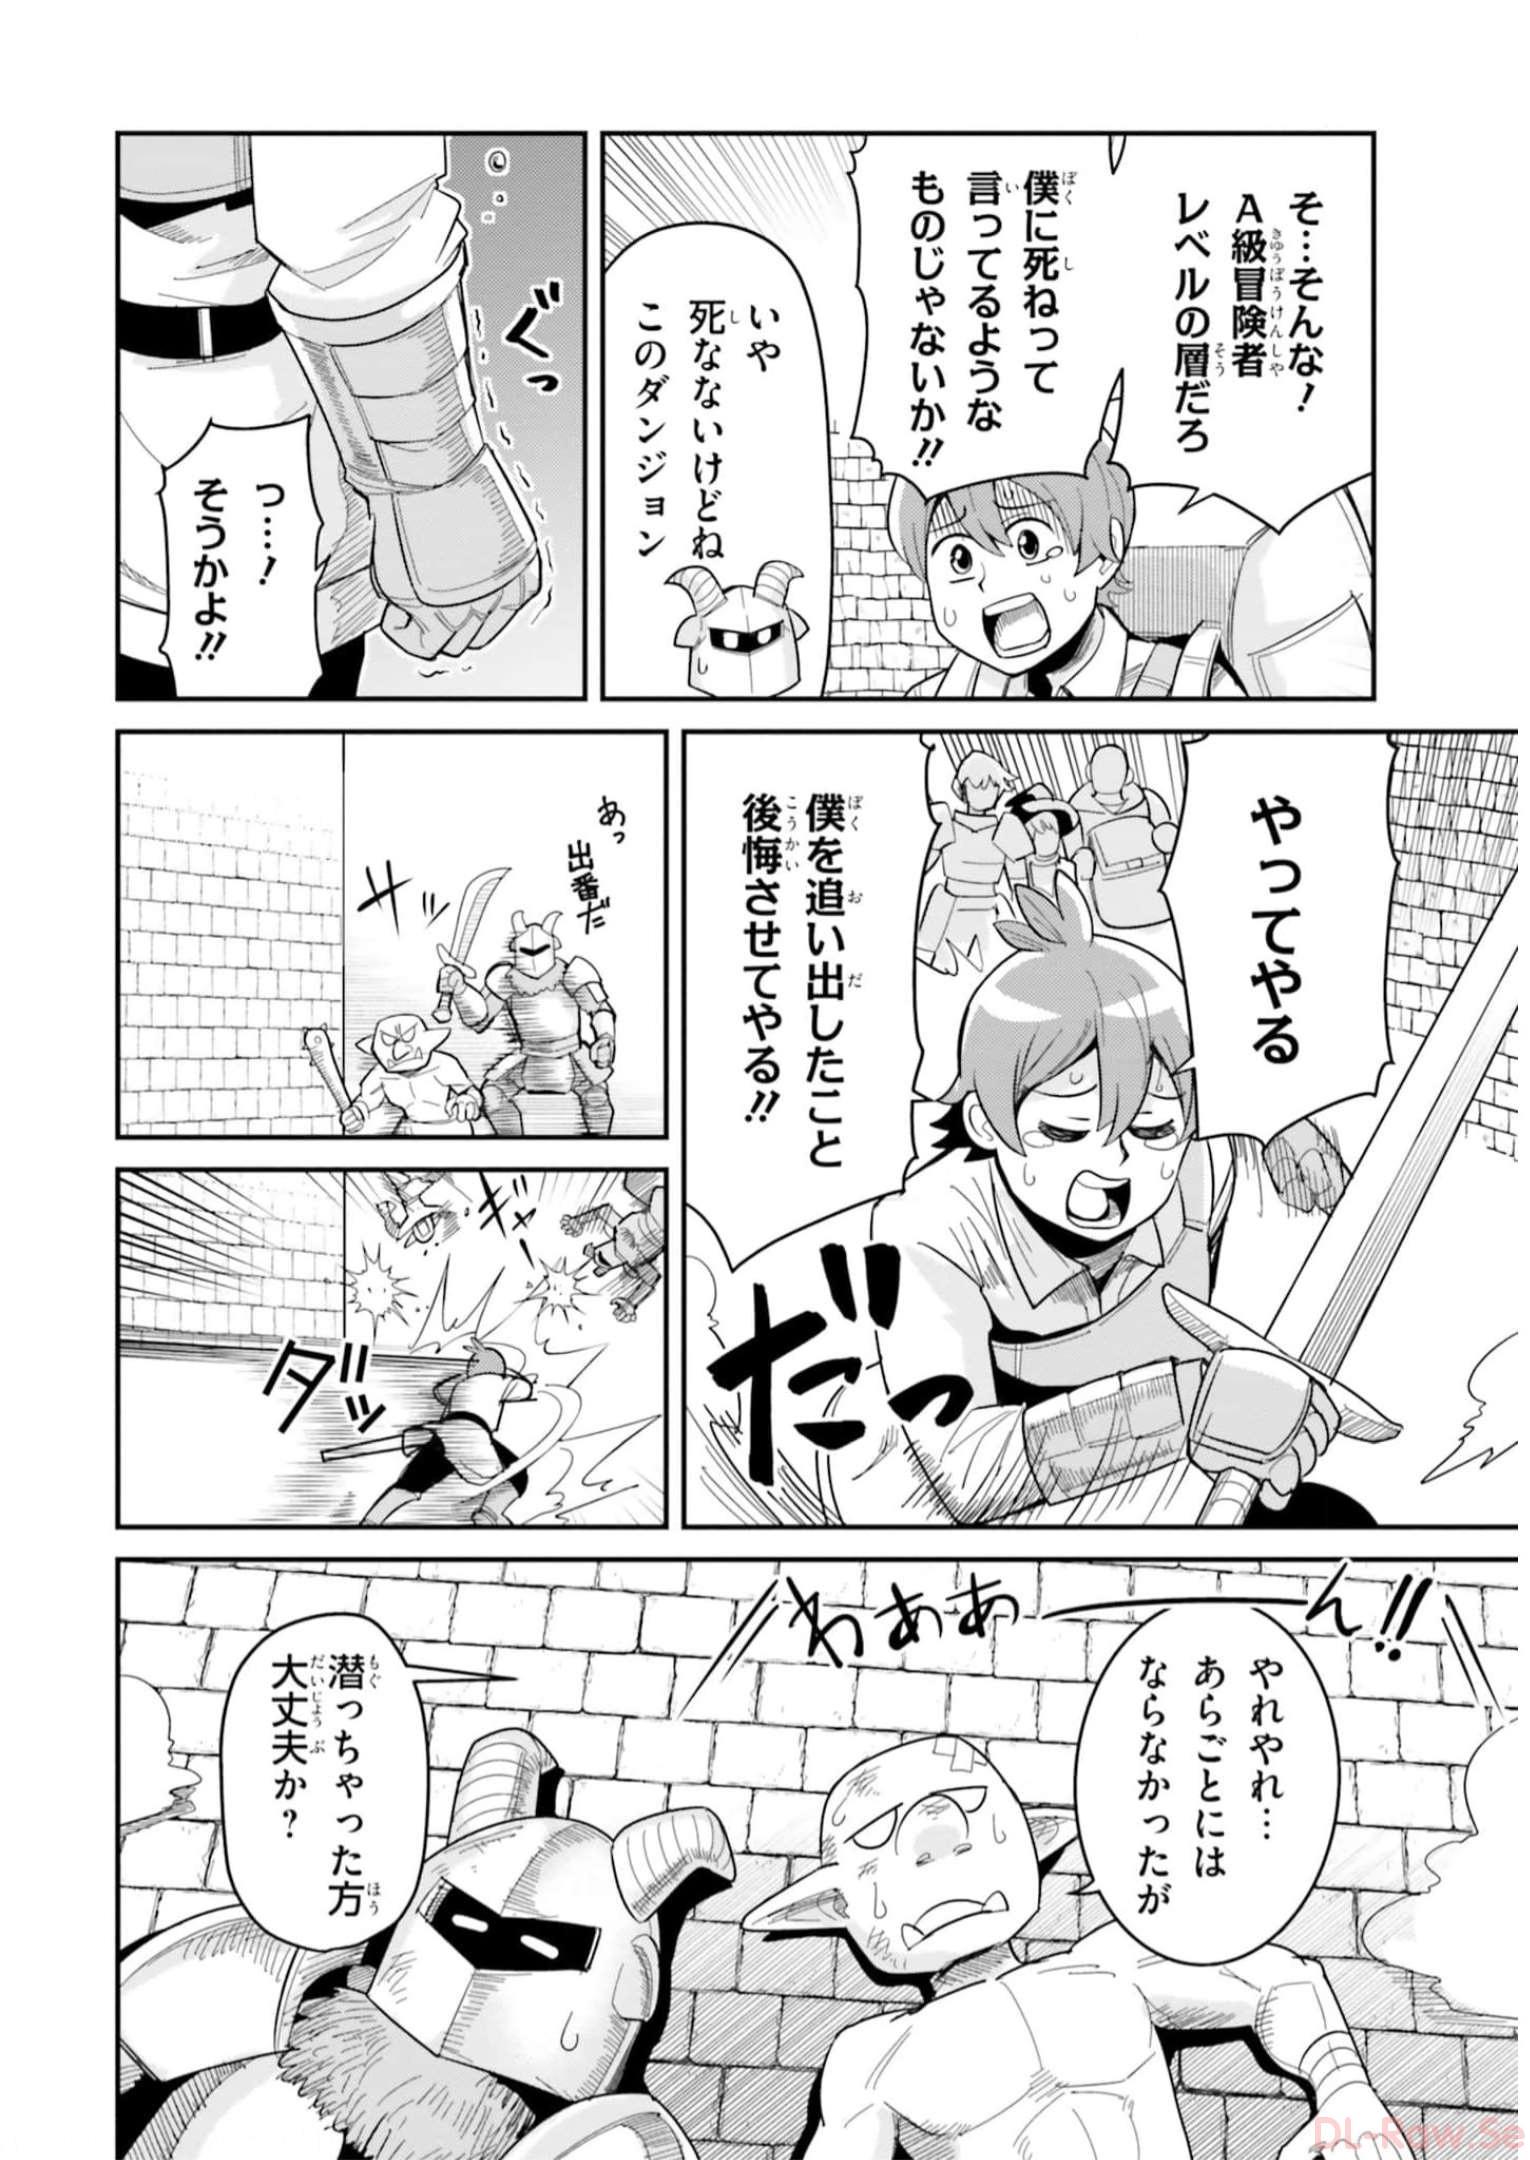 Dungeon Friends Forever Dungeon's Childhood Friend ダンジョンの幼なじみ 第25話 - Page 6